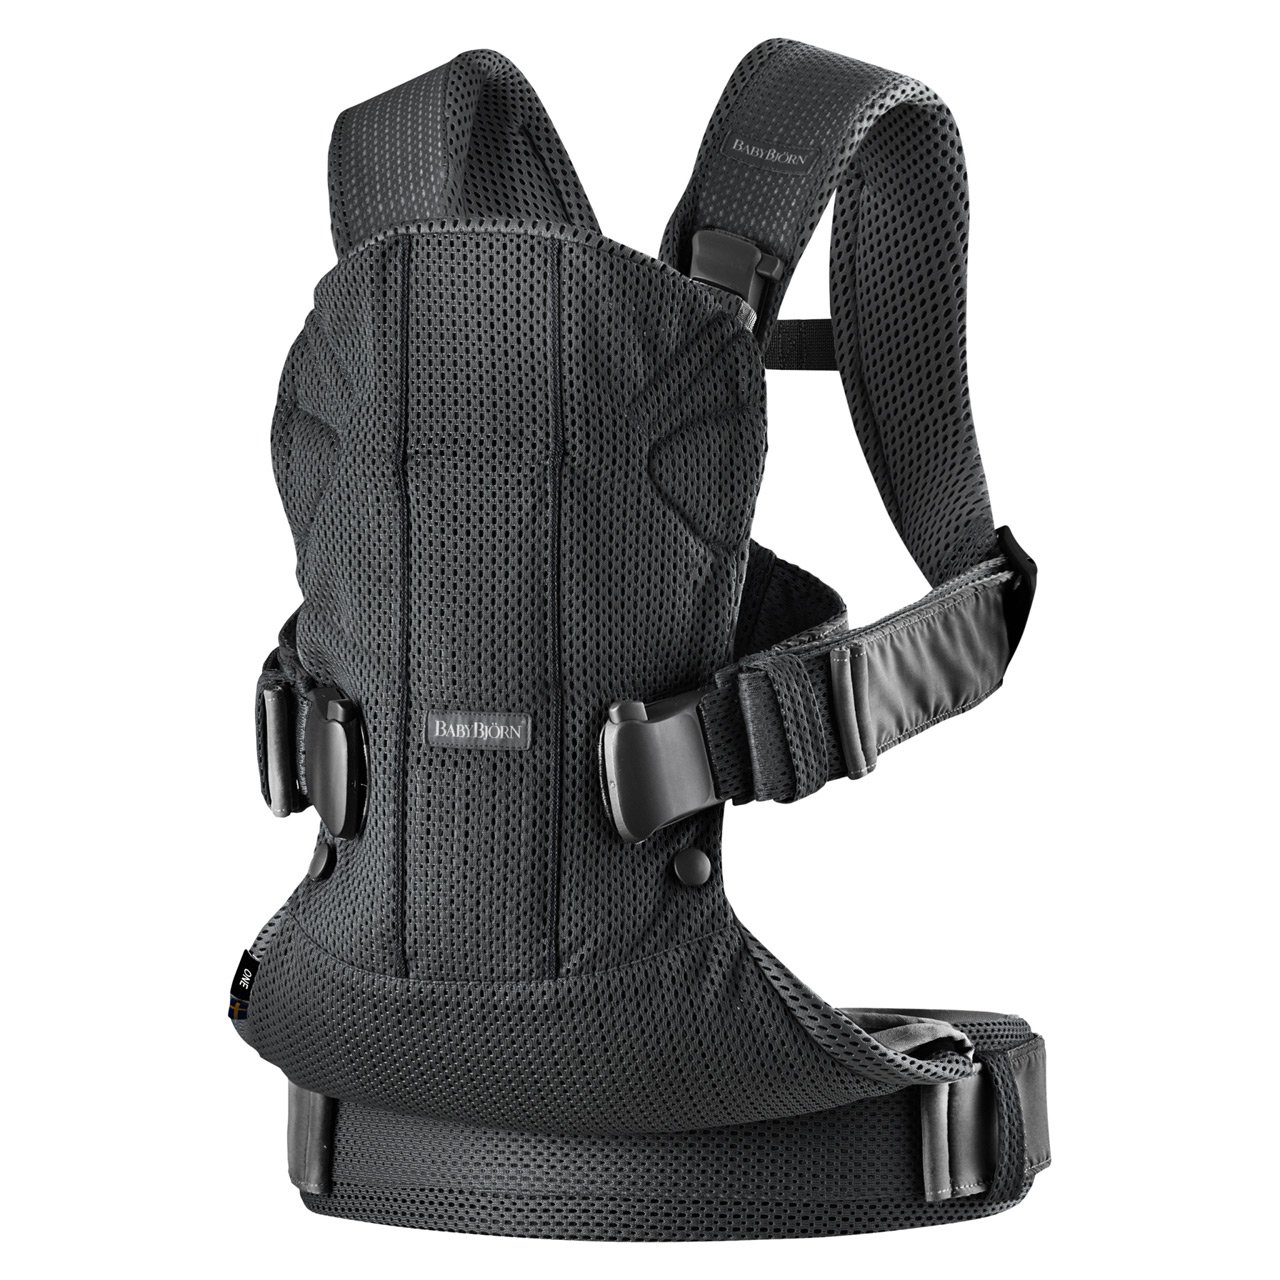 BabyBjörn Baby Carrier One Mesh